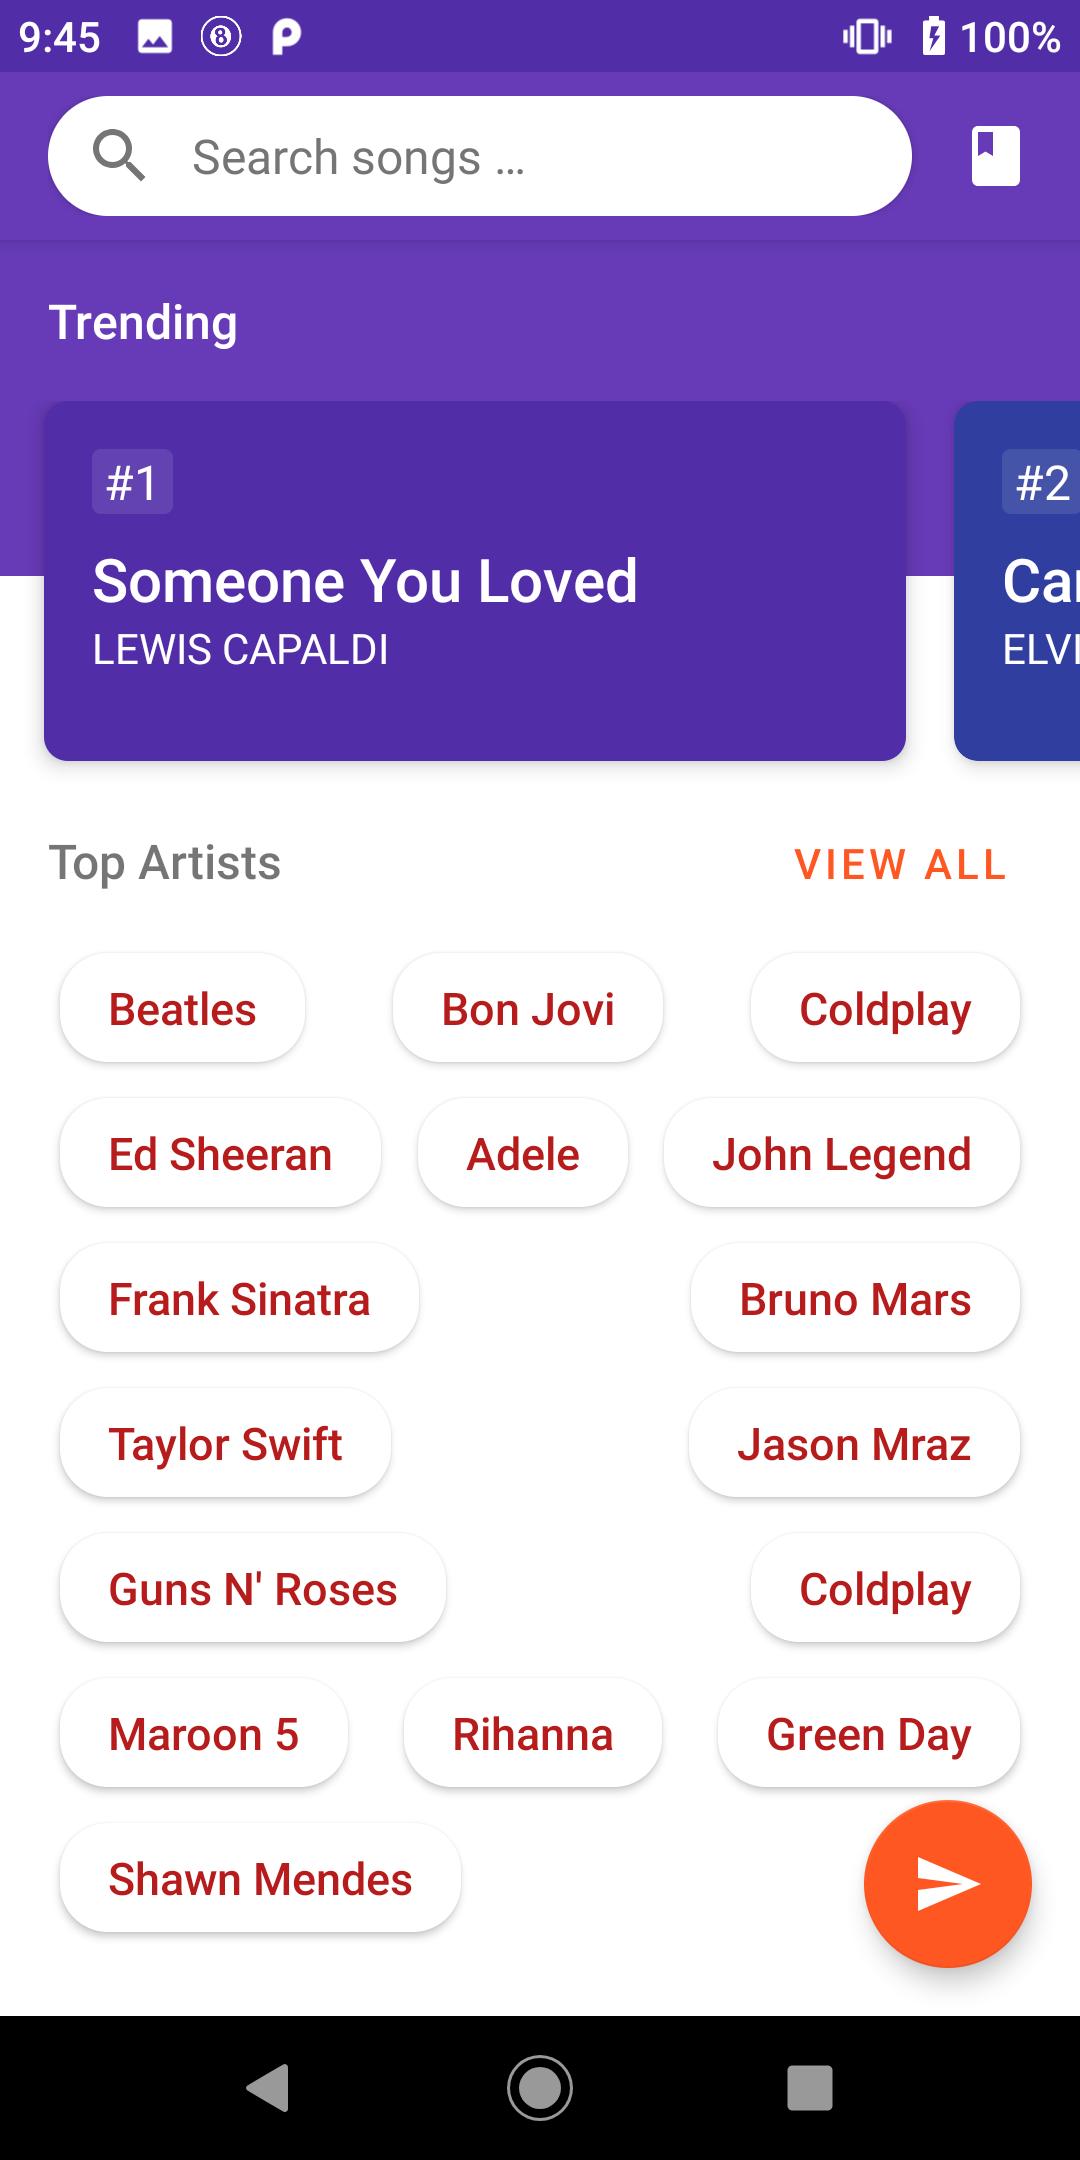 Guitar Chord and Song Lyrics Offline 2021 for Android - APK Download